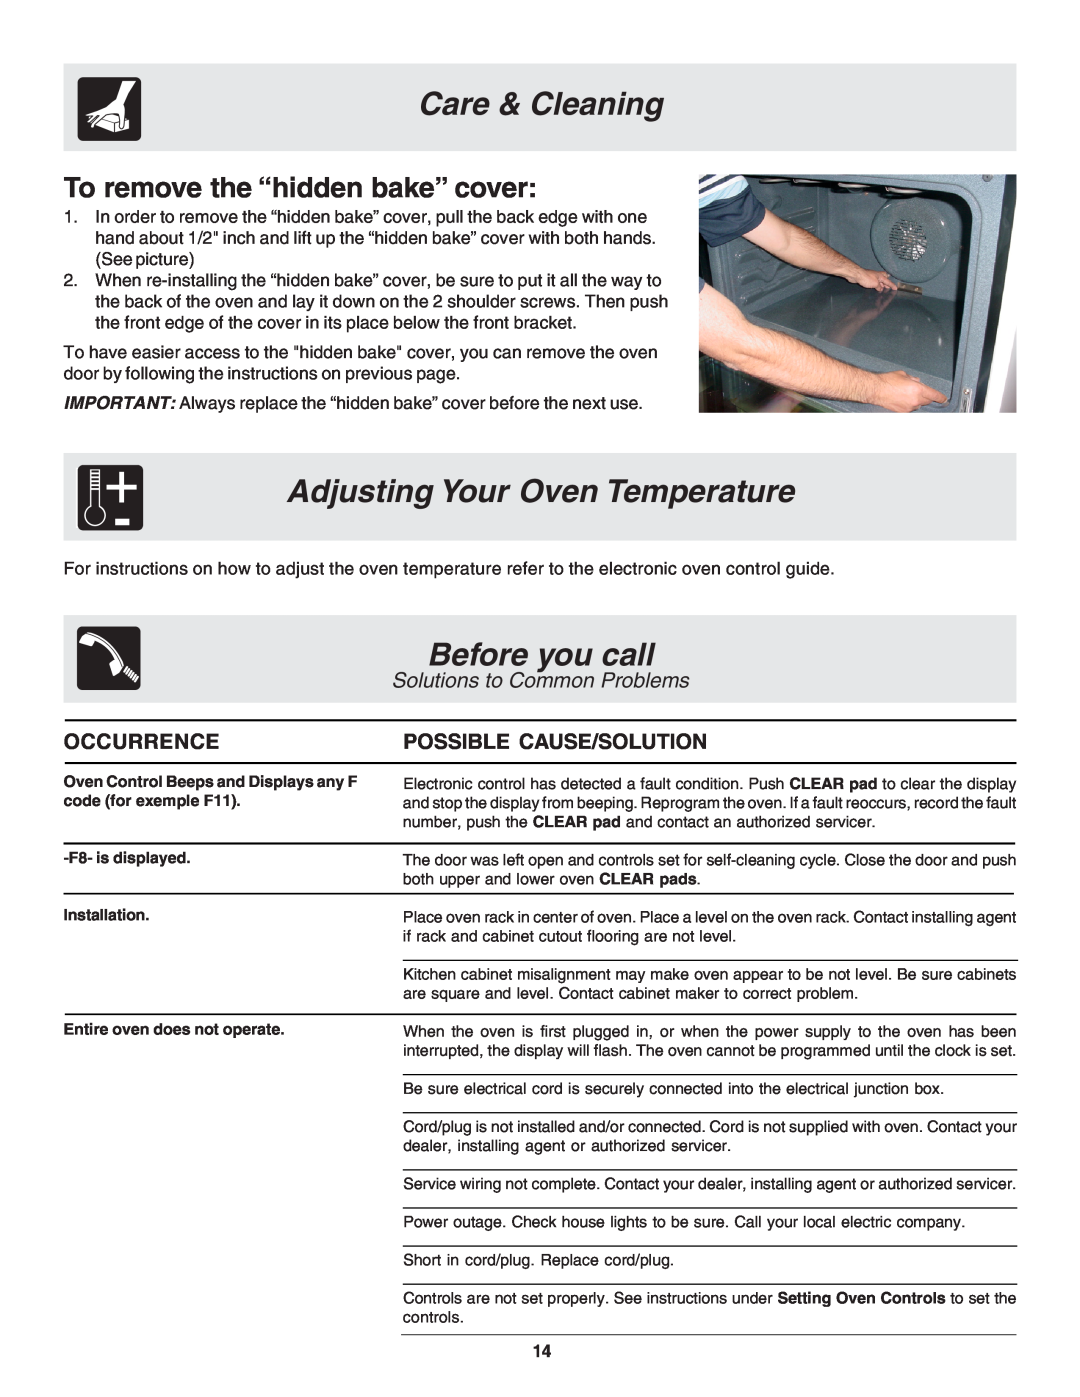 Frigidaire 318200929 Adjusting Your Oven Temperature, Before you call, To remove the “hidden bake” cover, Care & Cleaning 